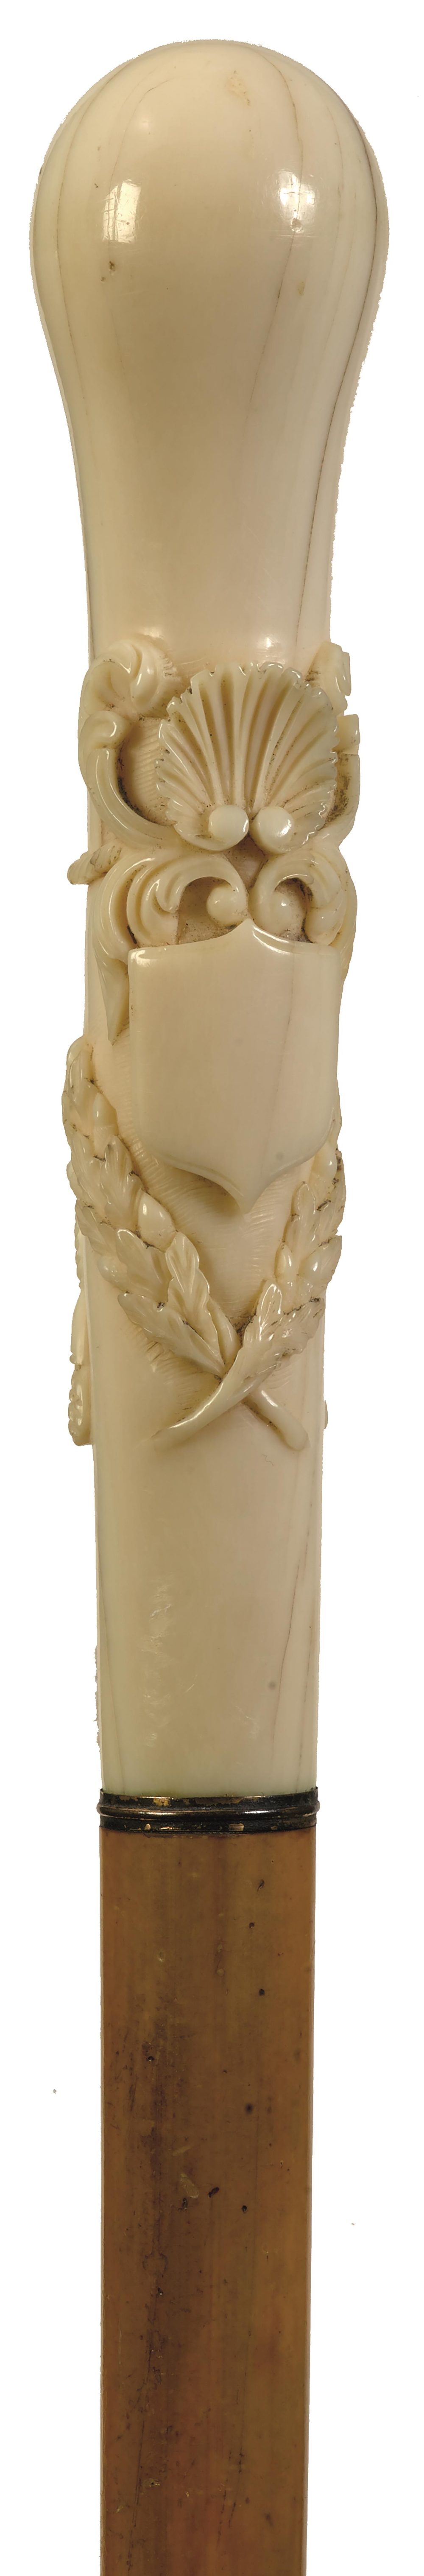 A LATE 19TH CENTURY WALKING CANE, the ivory handle of slender bulbous form and carved in relief with